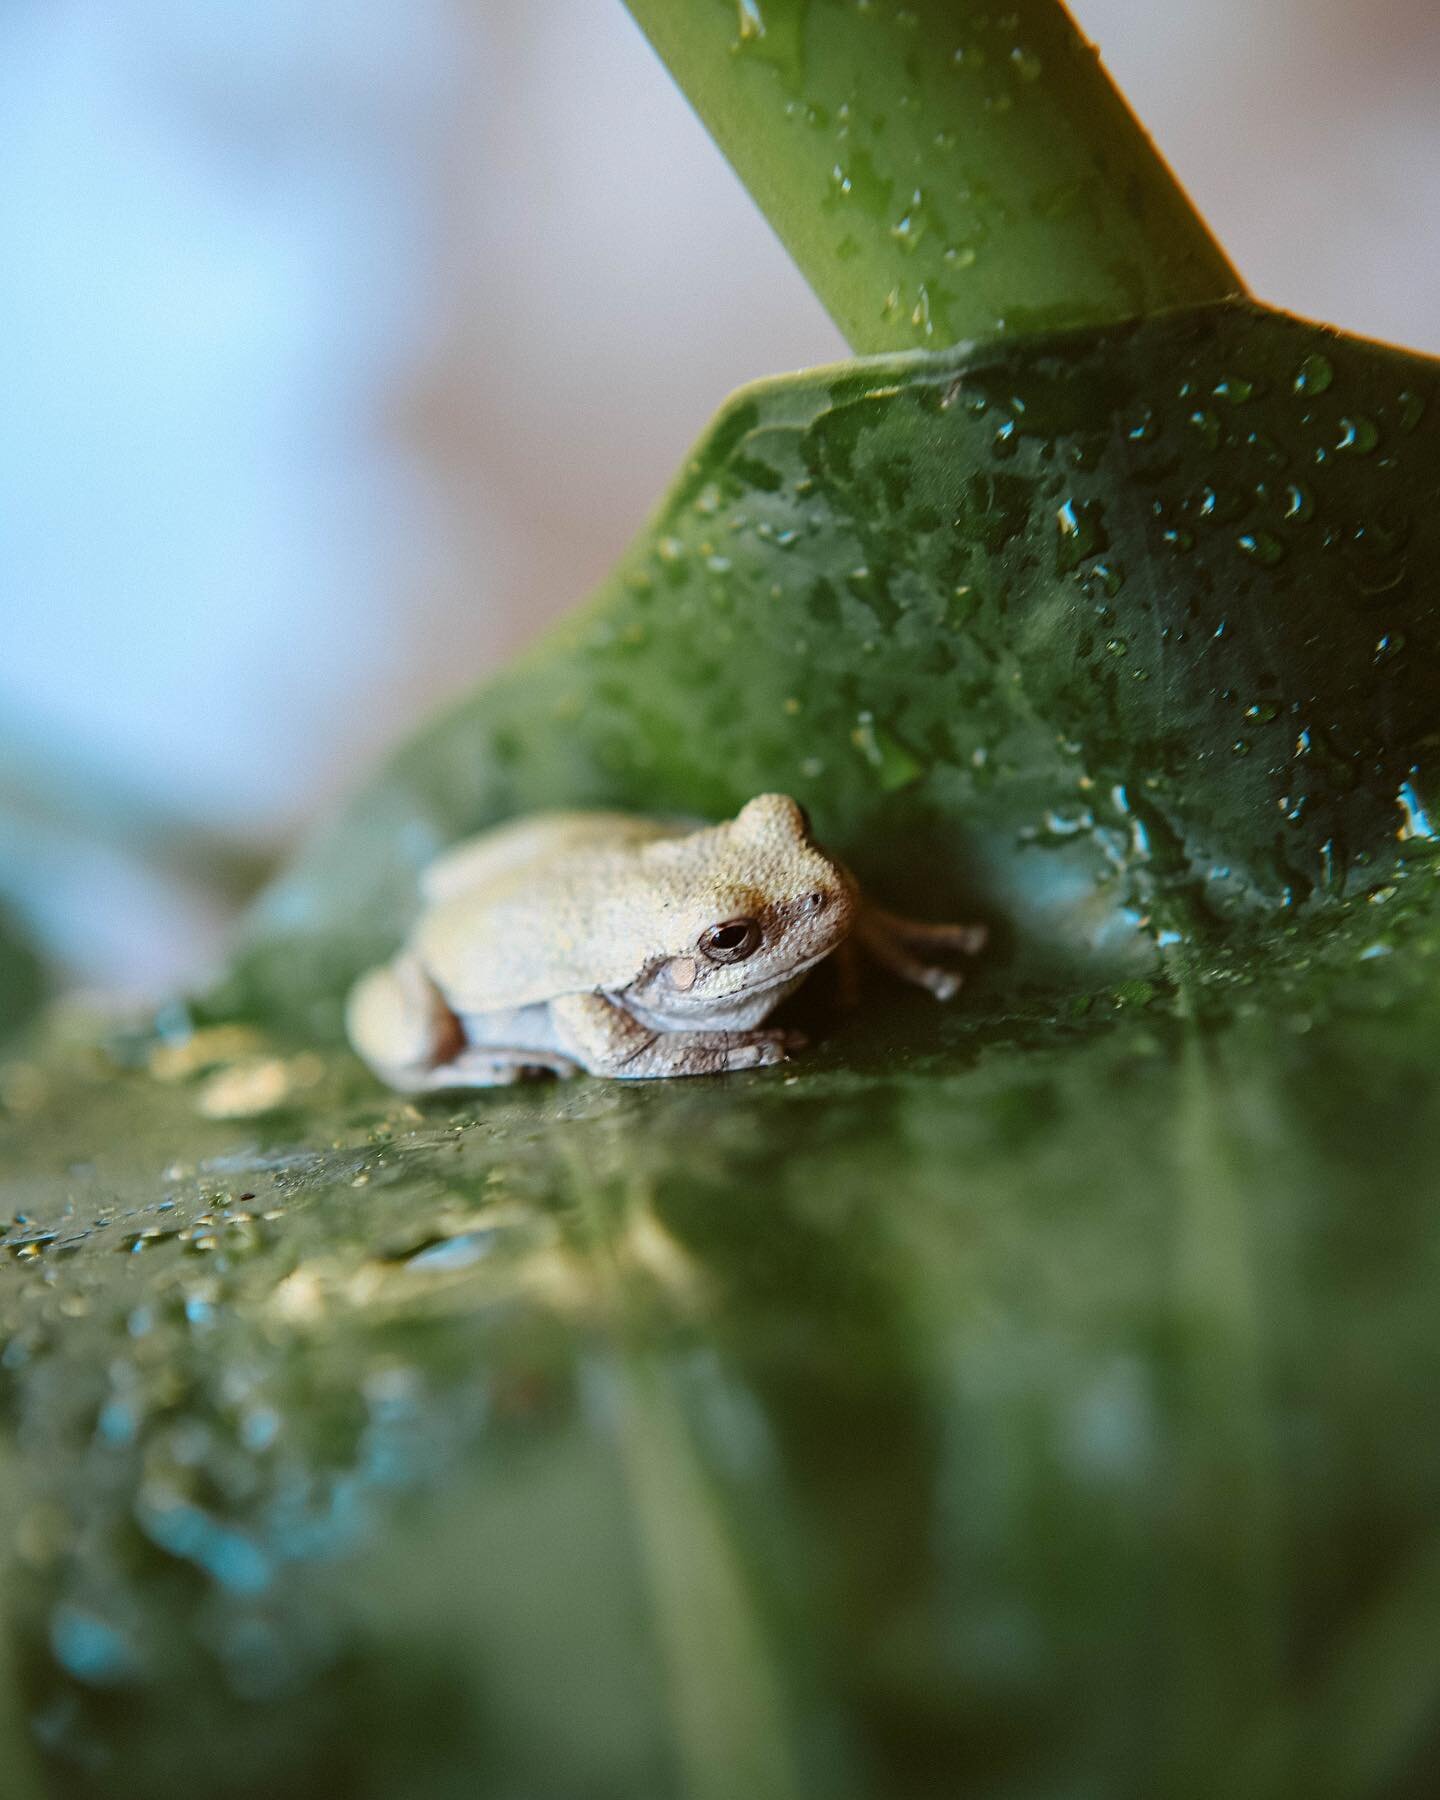 Remembering back to last summer and this little frequent visitor to my elephant ear on our front porch. 🐸
.
.
.
#frog #froggy #elephant ear #summer #ruralok #ruraloklahoma #beggsoklahoma #okmulgeeoklahoma #depthoffield #depthoffieldphotography #sunp